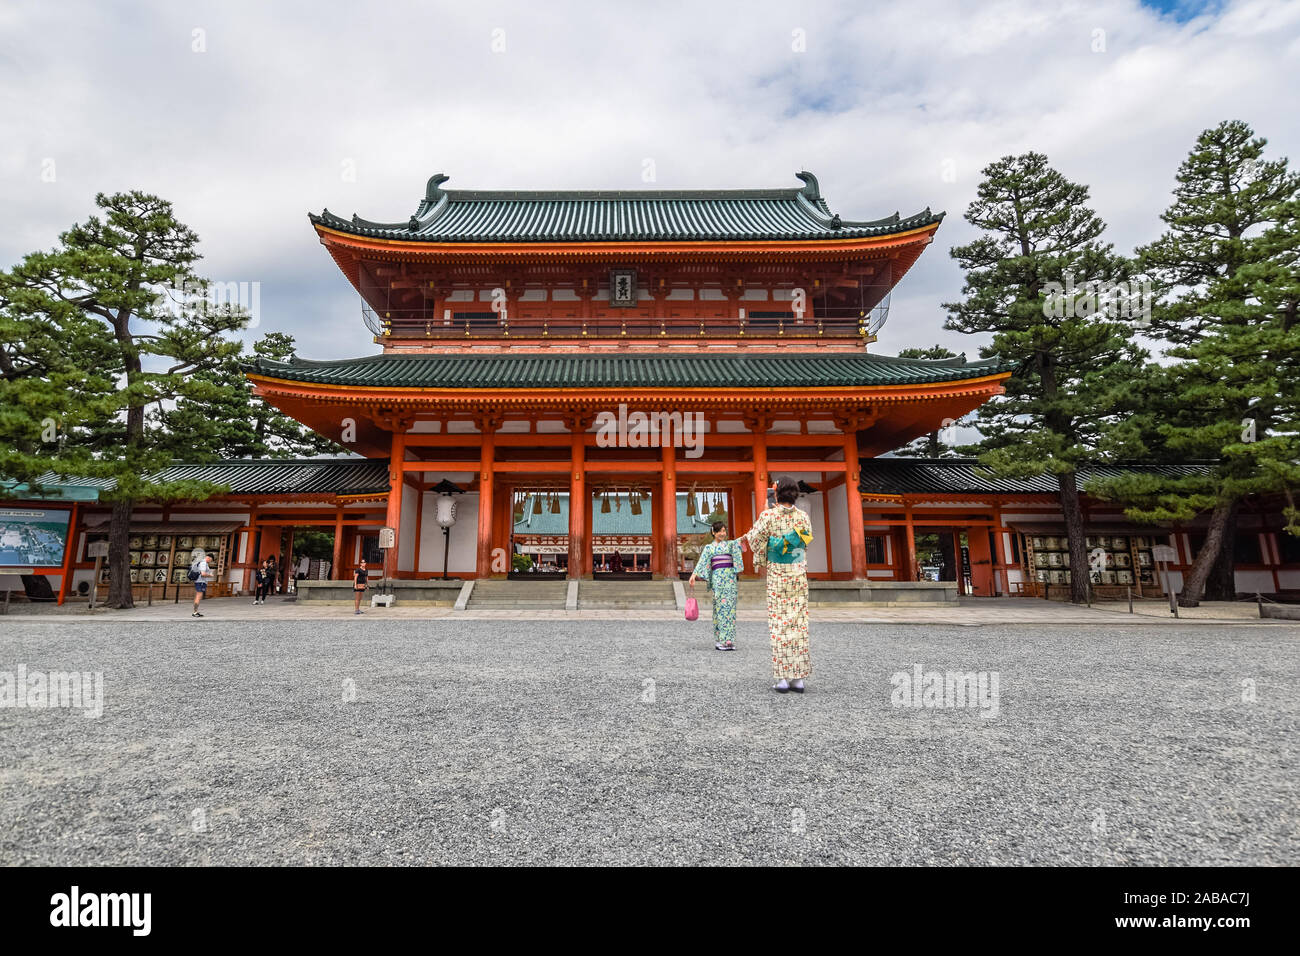 Two young Asian tourists dressed in traditional japanese kimonos taking a photo in front of the famous Heian Shrine in Kyoto, Japan. Stock Photo